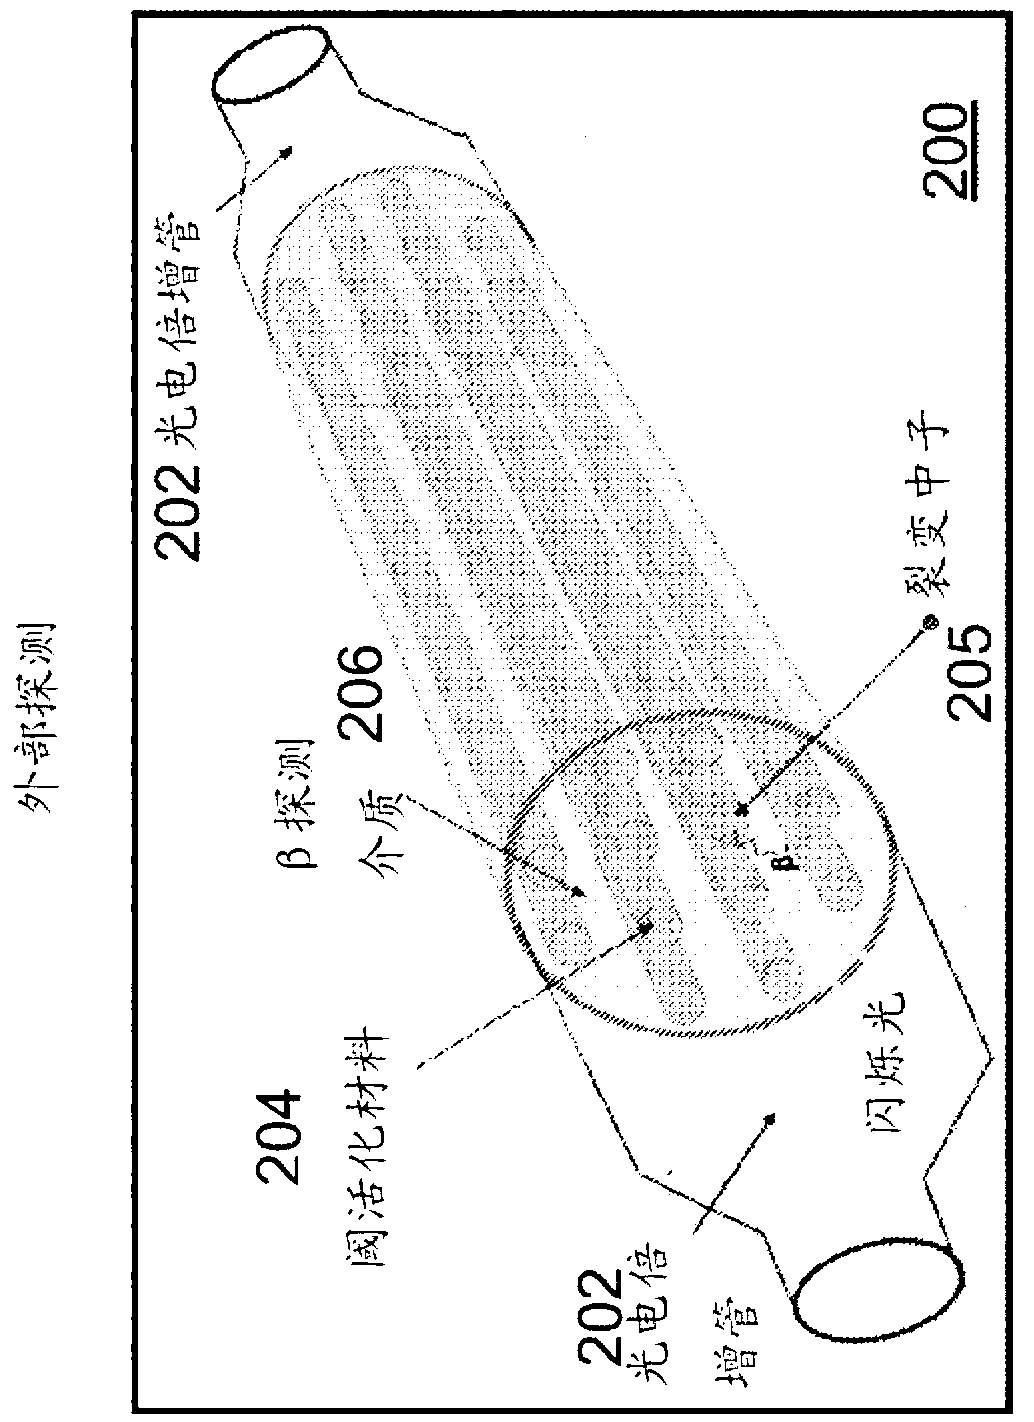 Systems and methods for detecting nuclear material